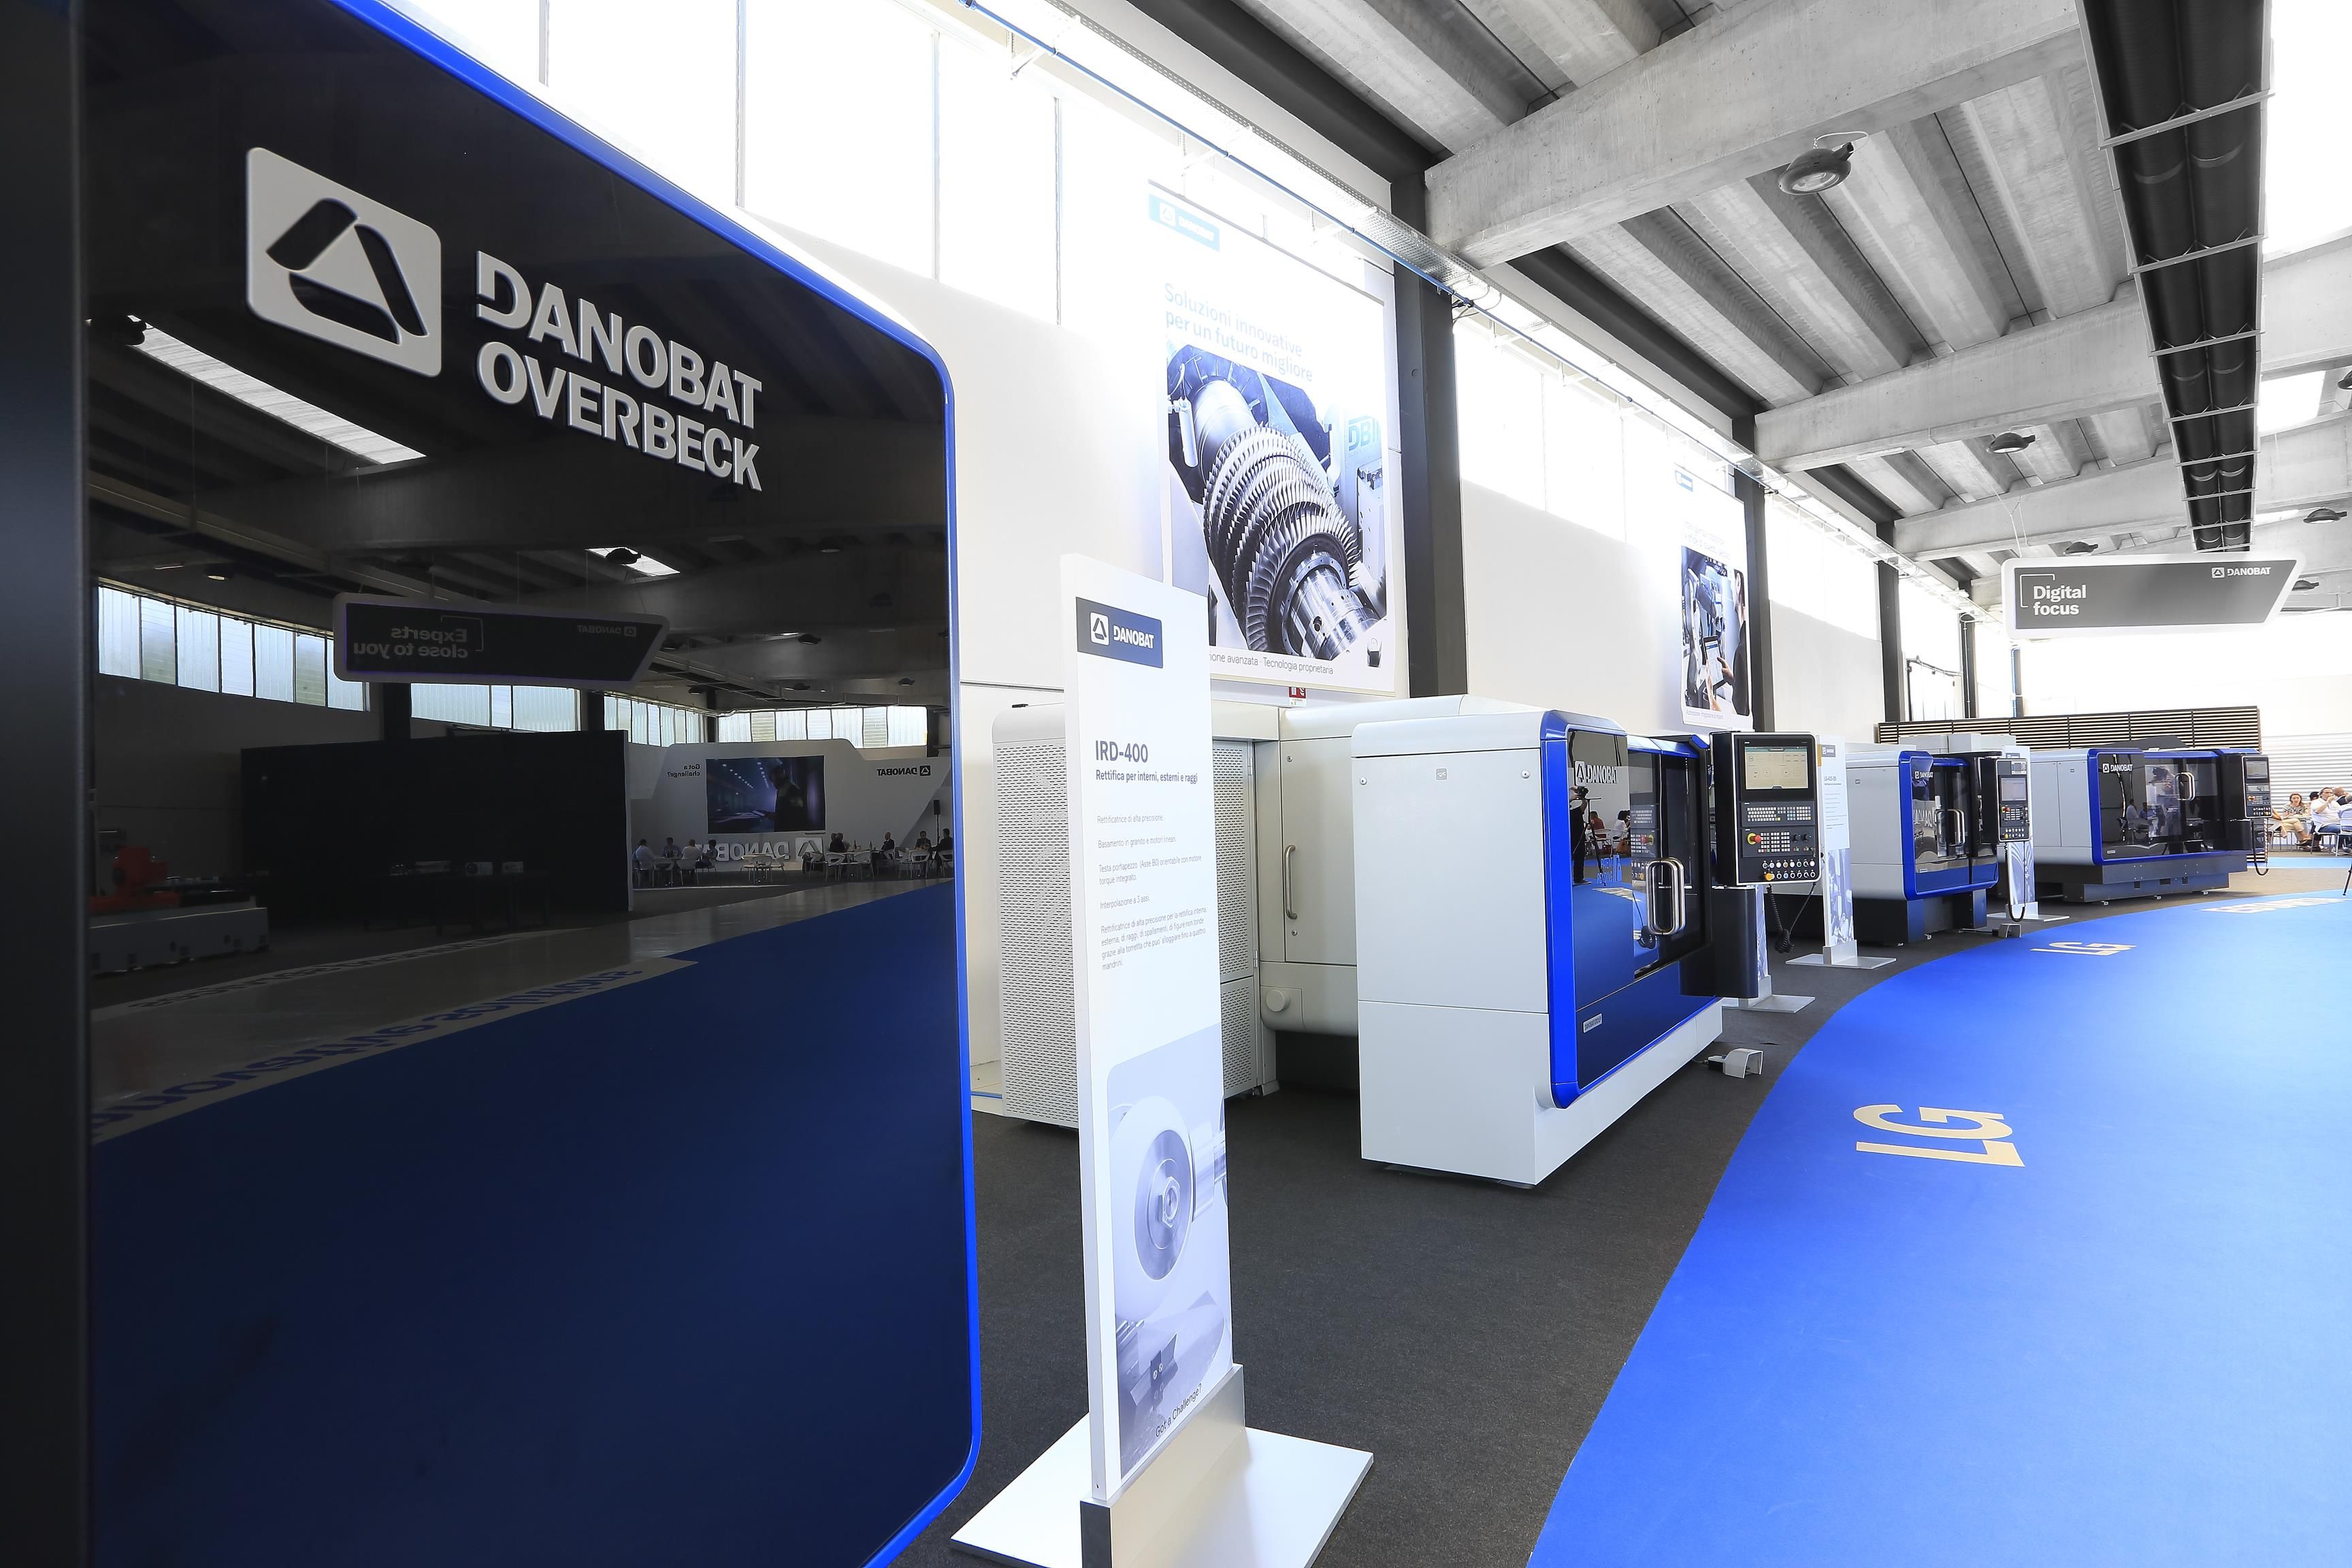 DANOBAT organises an Open House at its german facilities to present its range of high-precision grinding machines